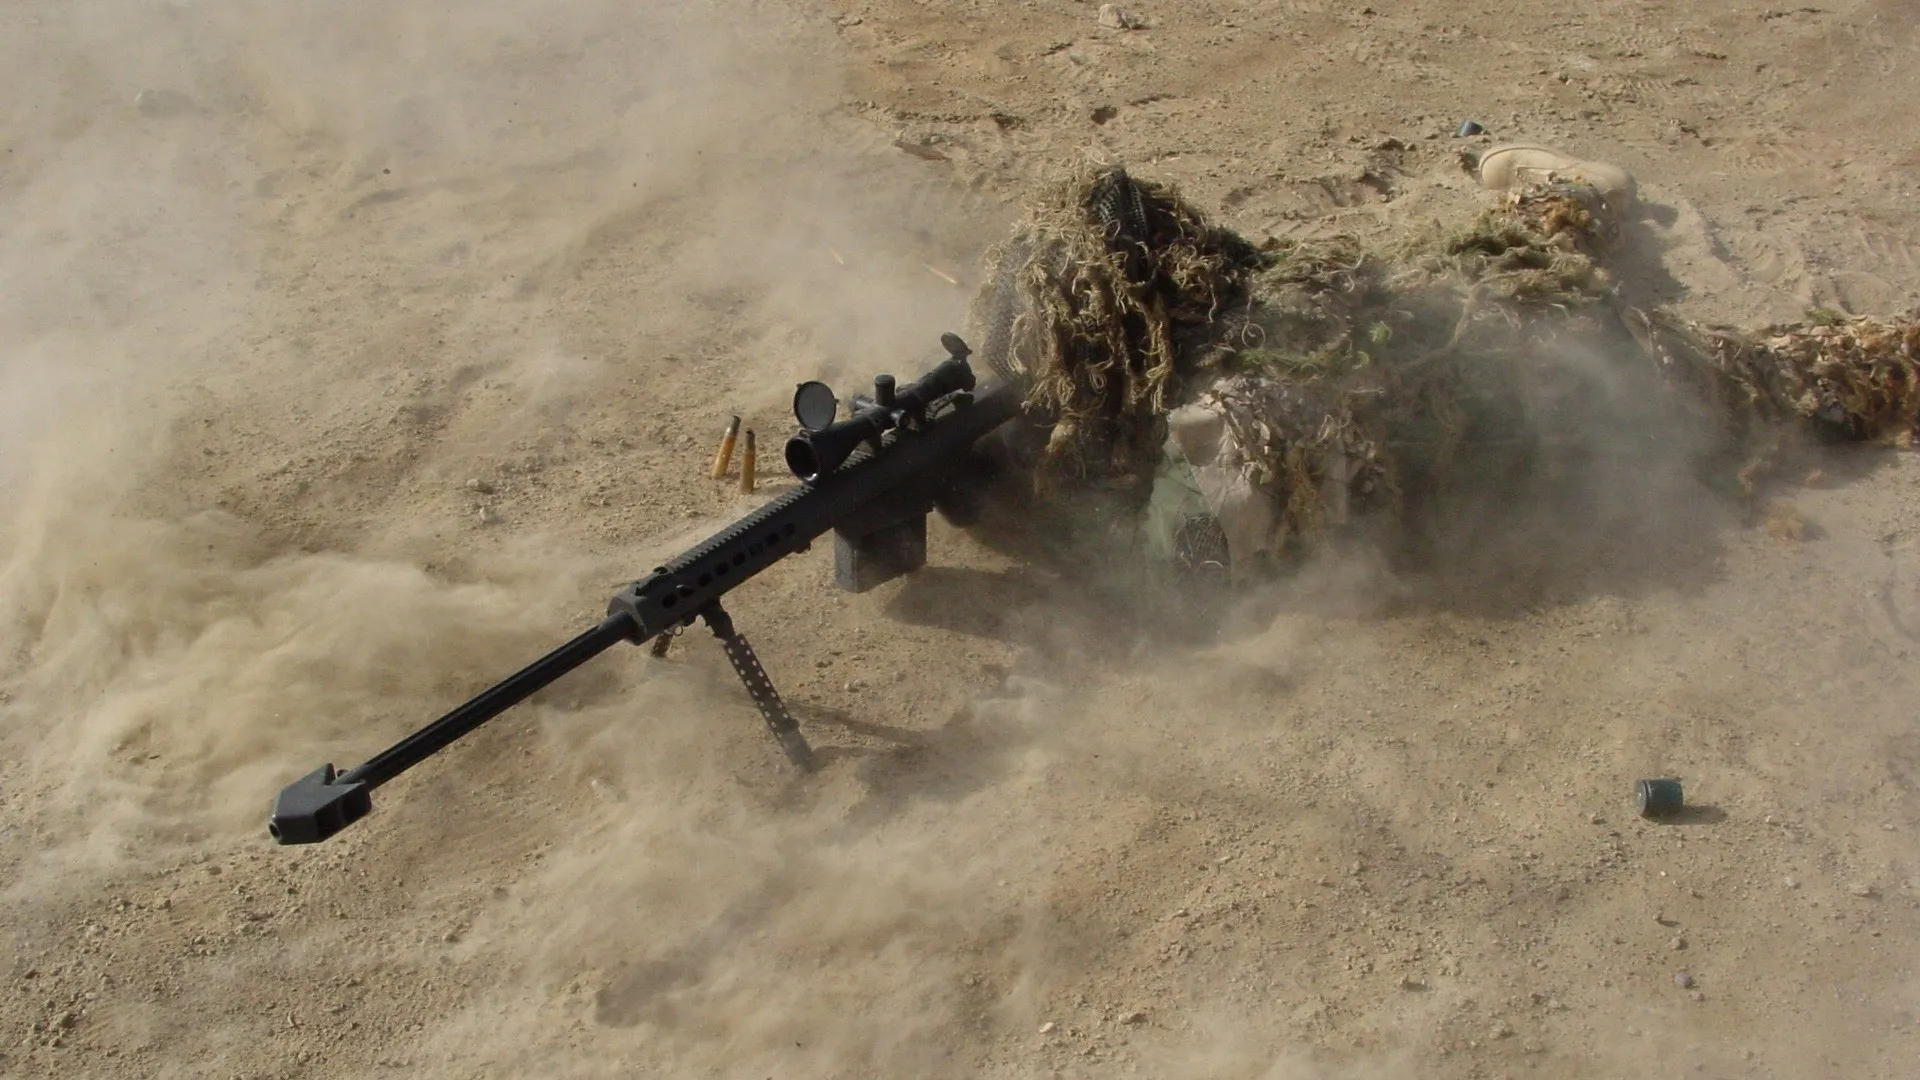 1920x1080 Becoming a Navy SEAL Sniper | SOFREP